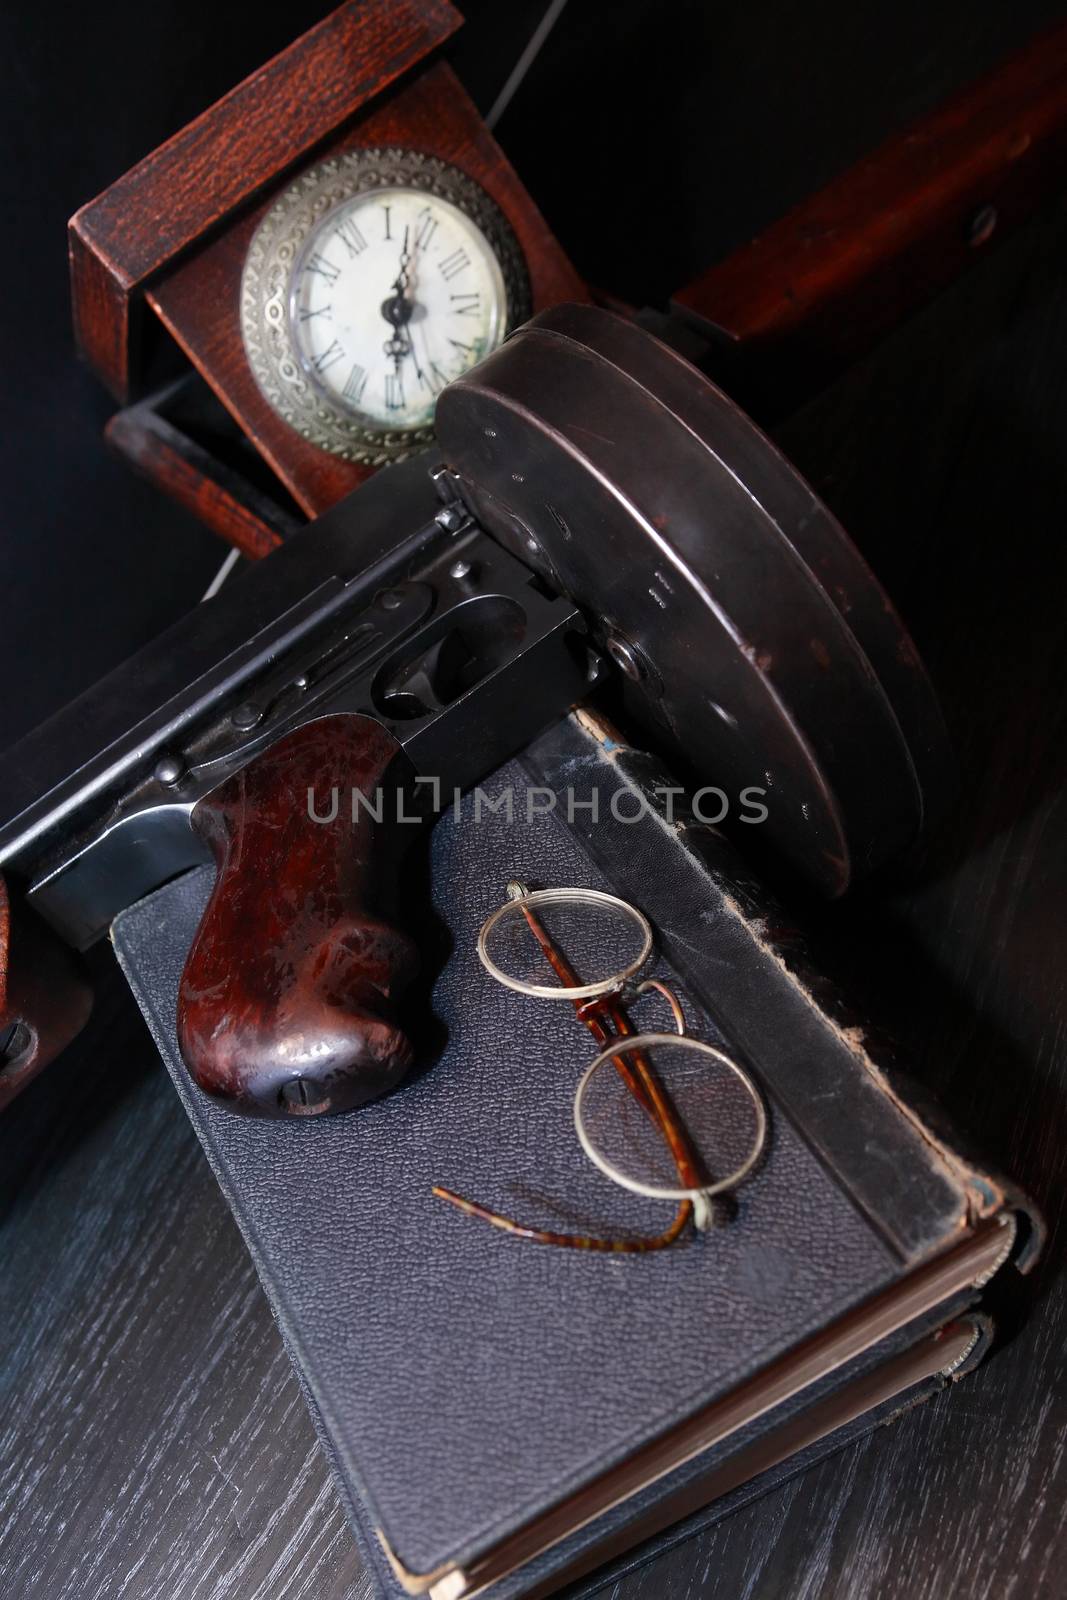 Old USA submachine gun closeup with books and spectacles